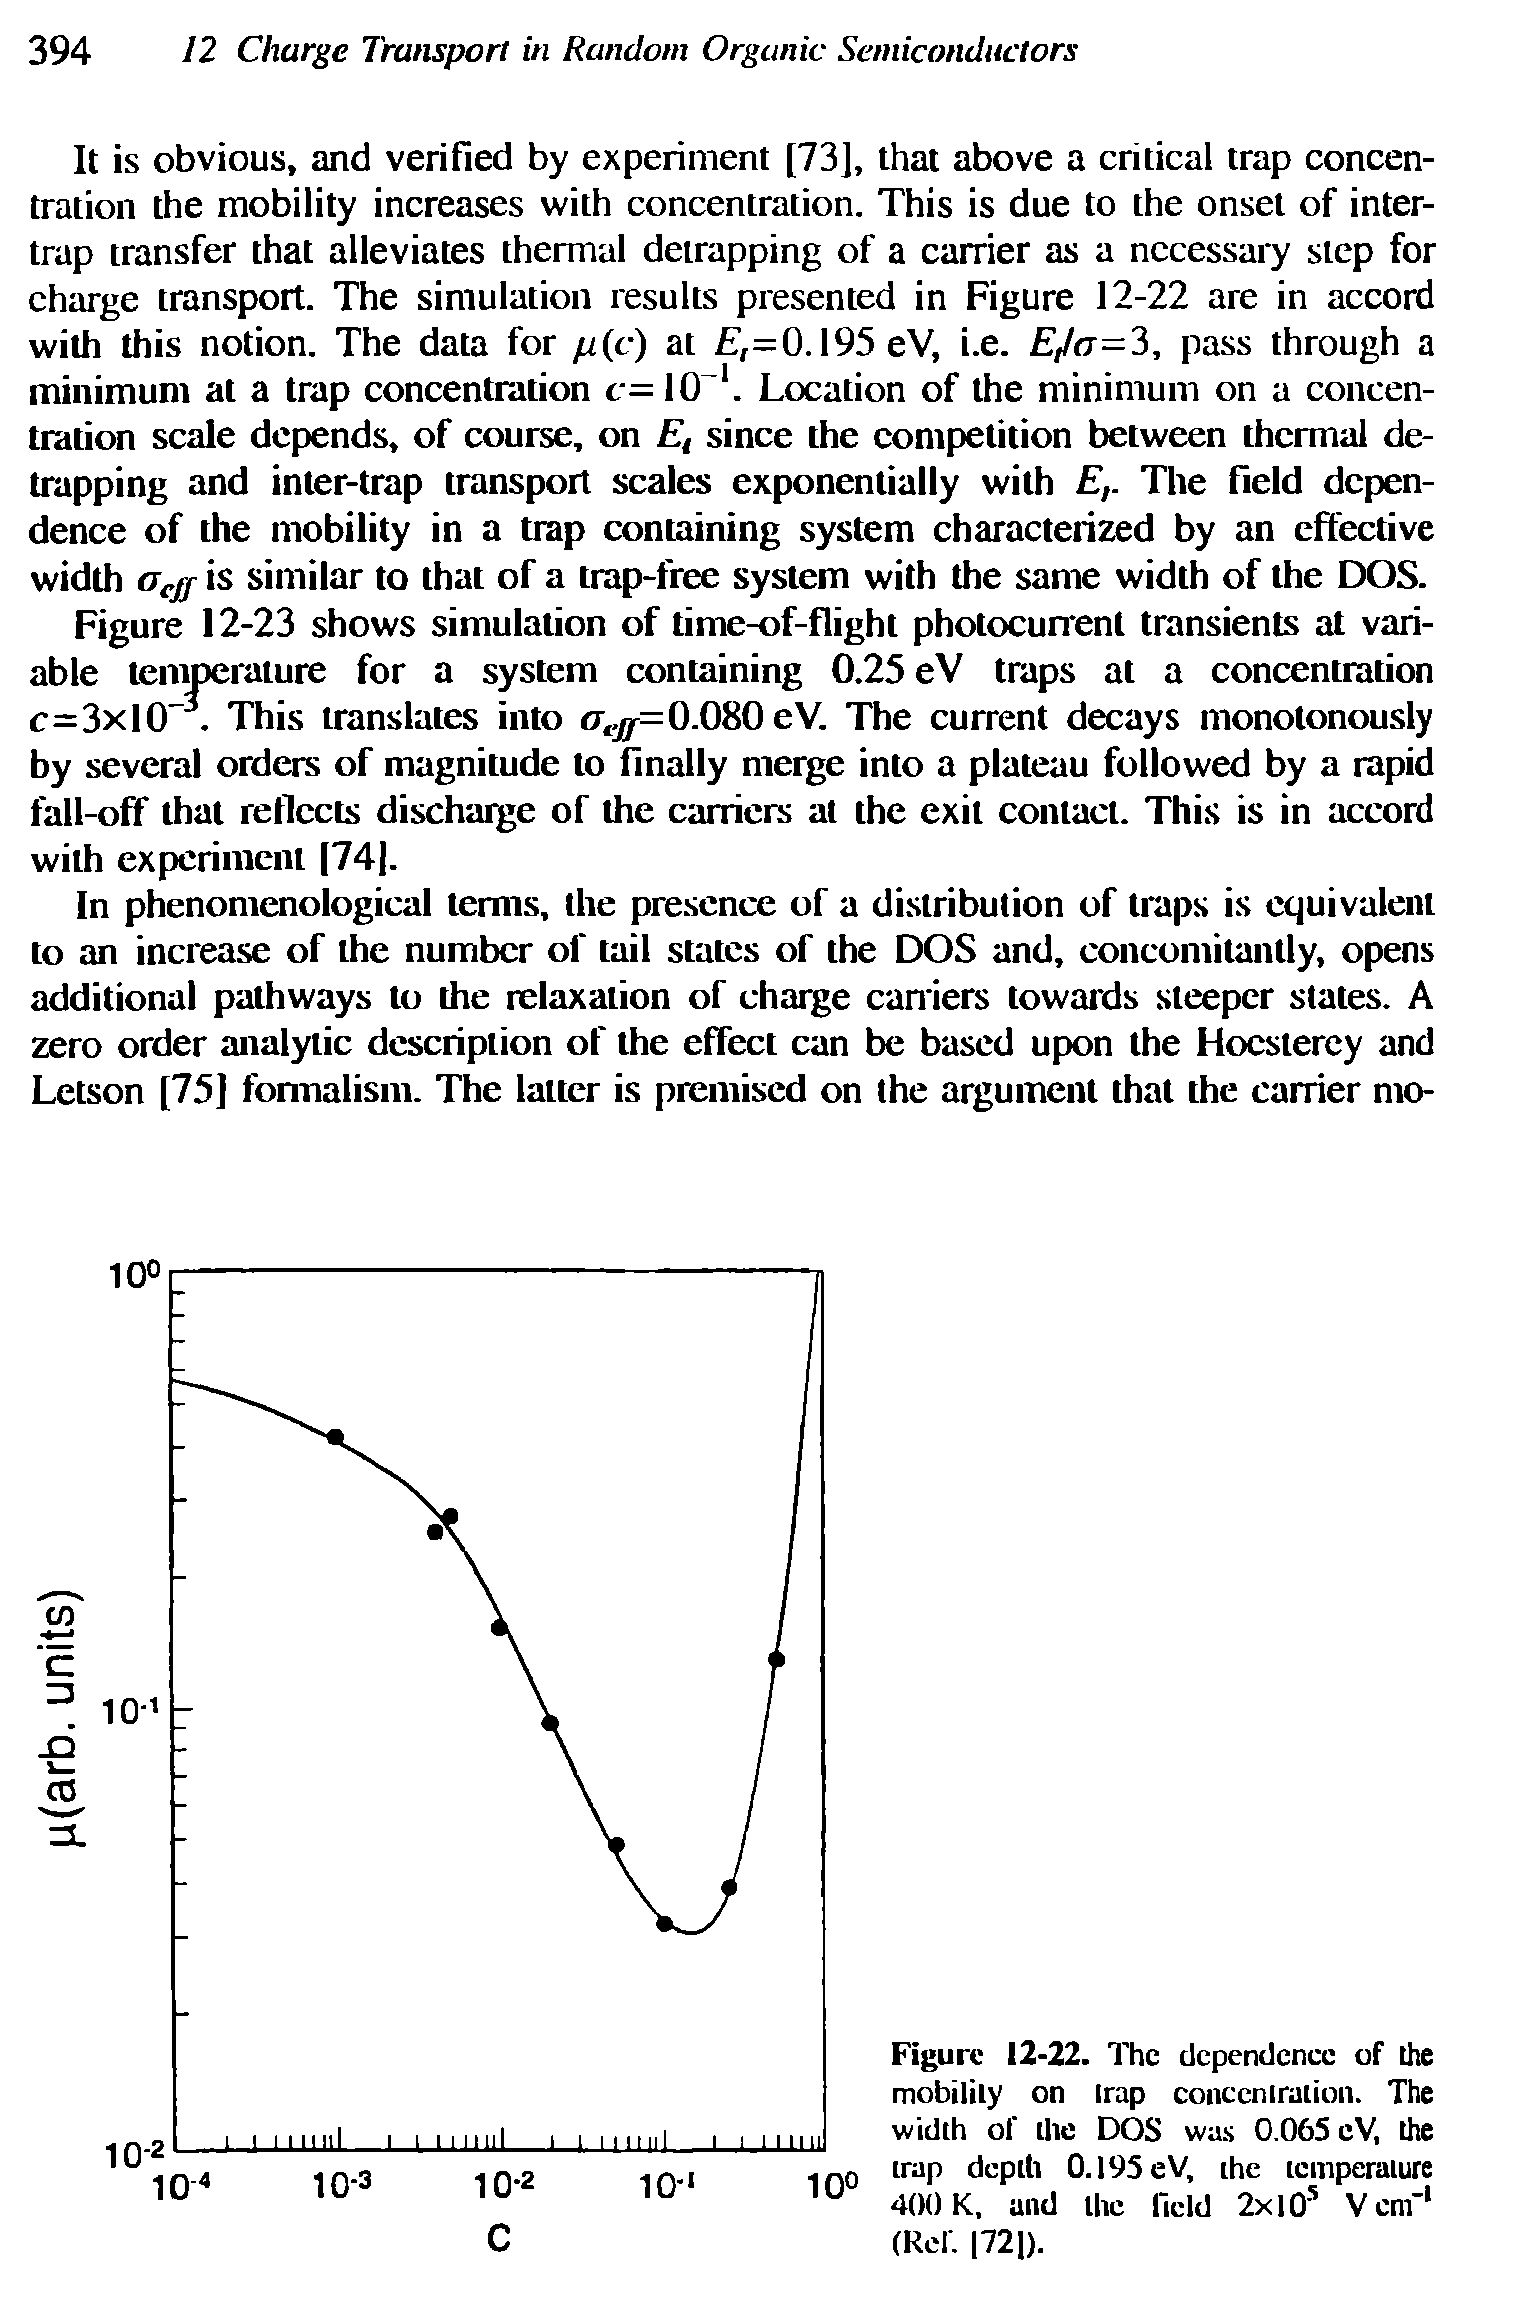 Figure 12-22. The dependence of the mobility on trap concentration. The width of the DOS was 0.065 eV, the...